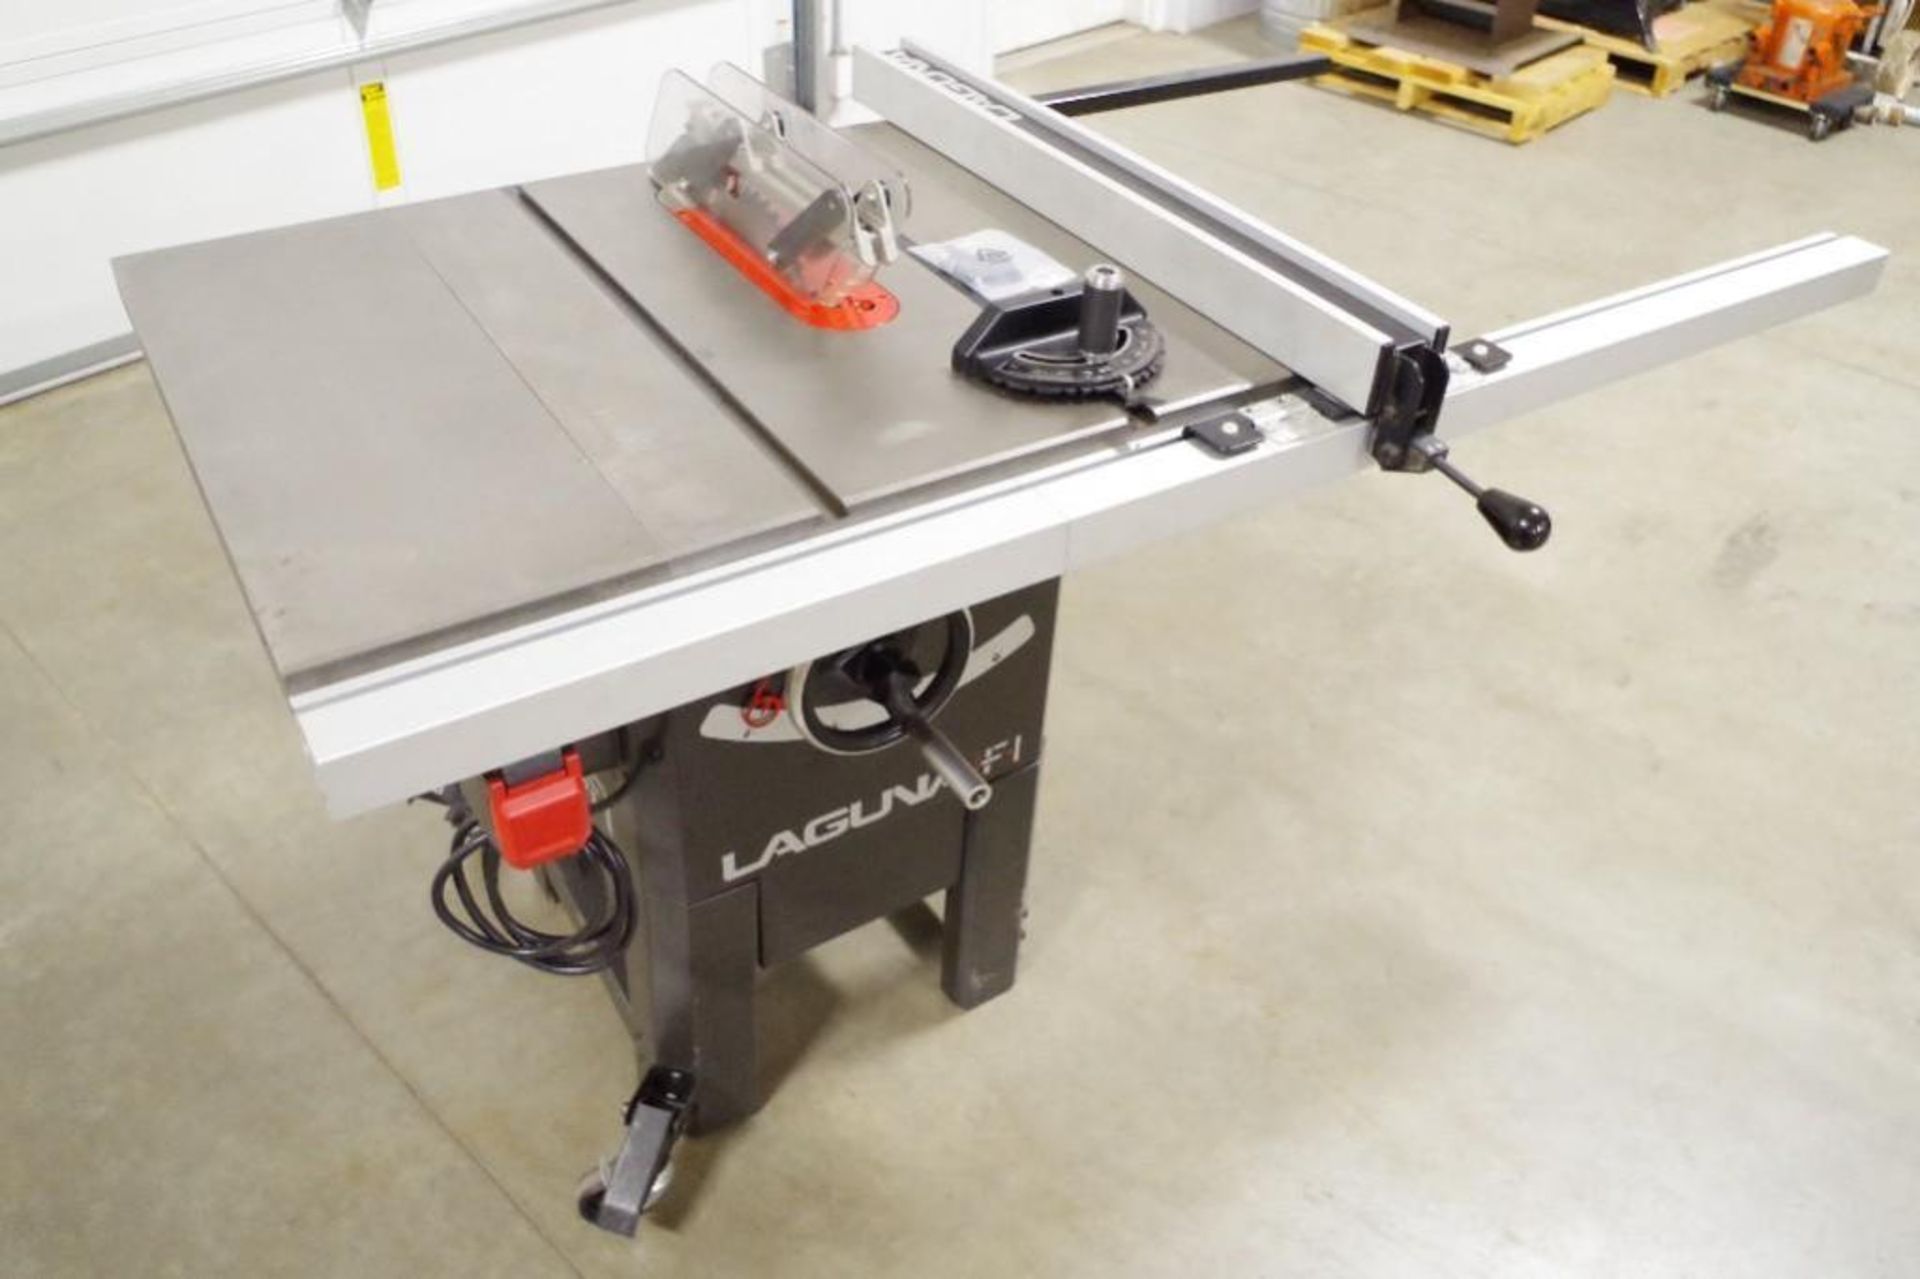 LAGUNA Fusion 10" Table Saw, 36"W Cut, 27" x 40" Cast Iron Table on Casters - Image 4 of 7